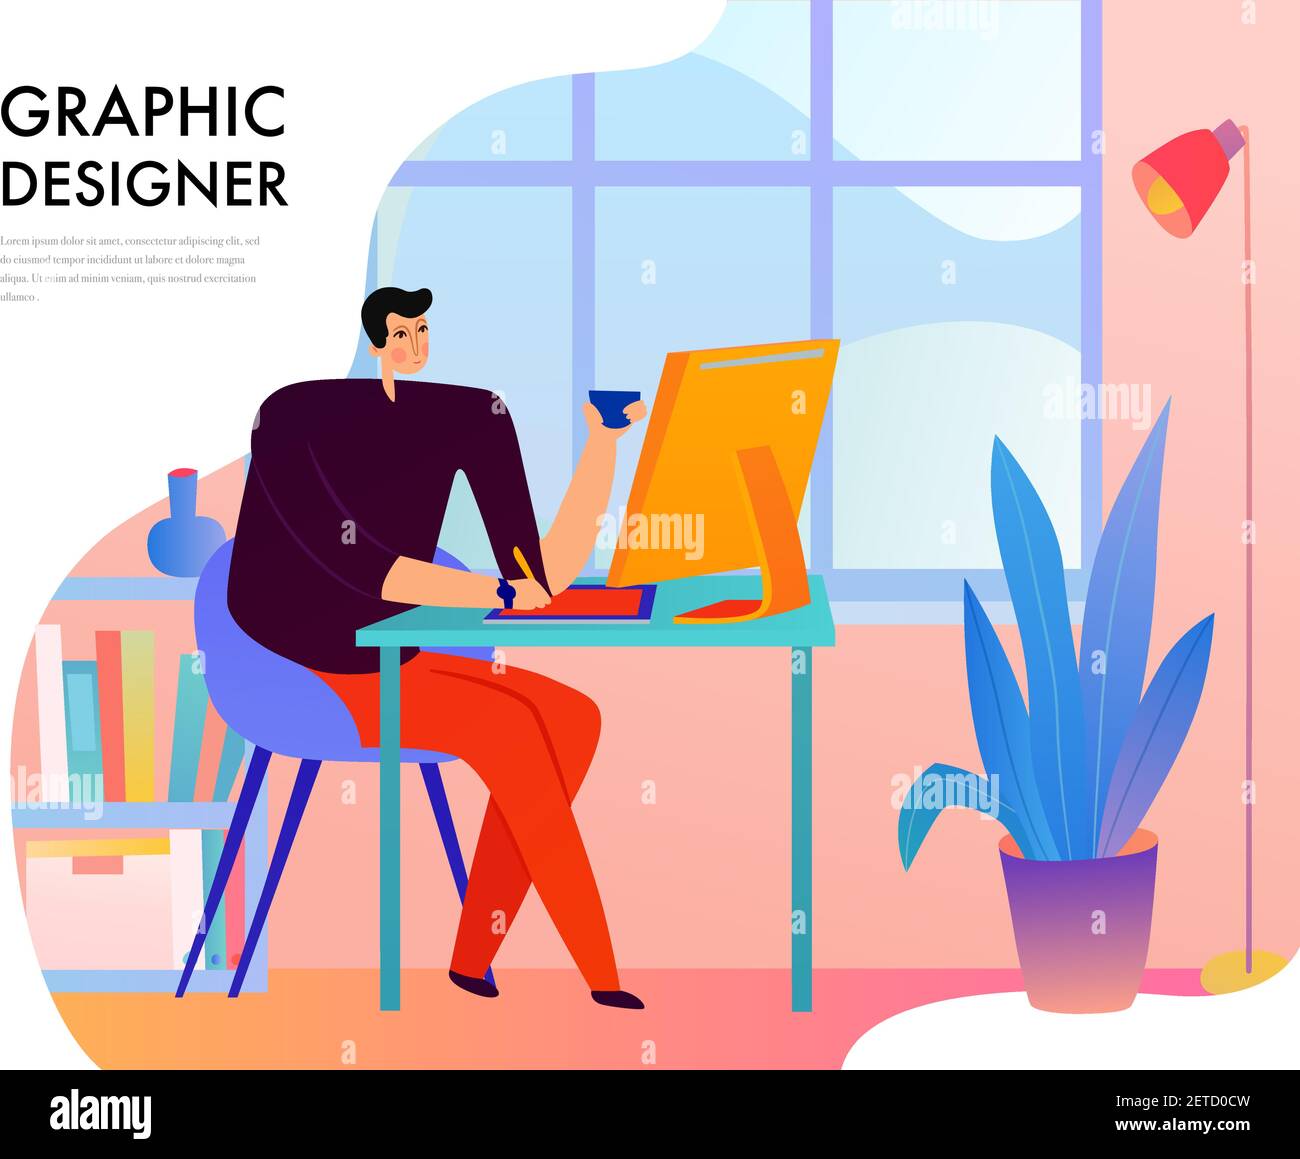 Graphic designer during creative work behind desk with computer on window background flat vector illustration Stock Vector